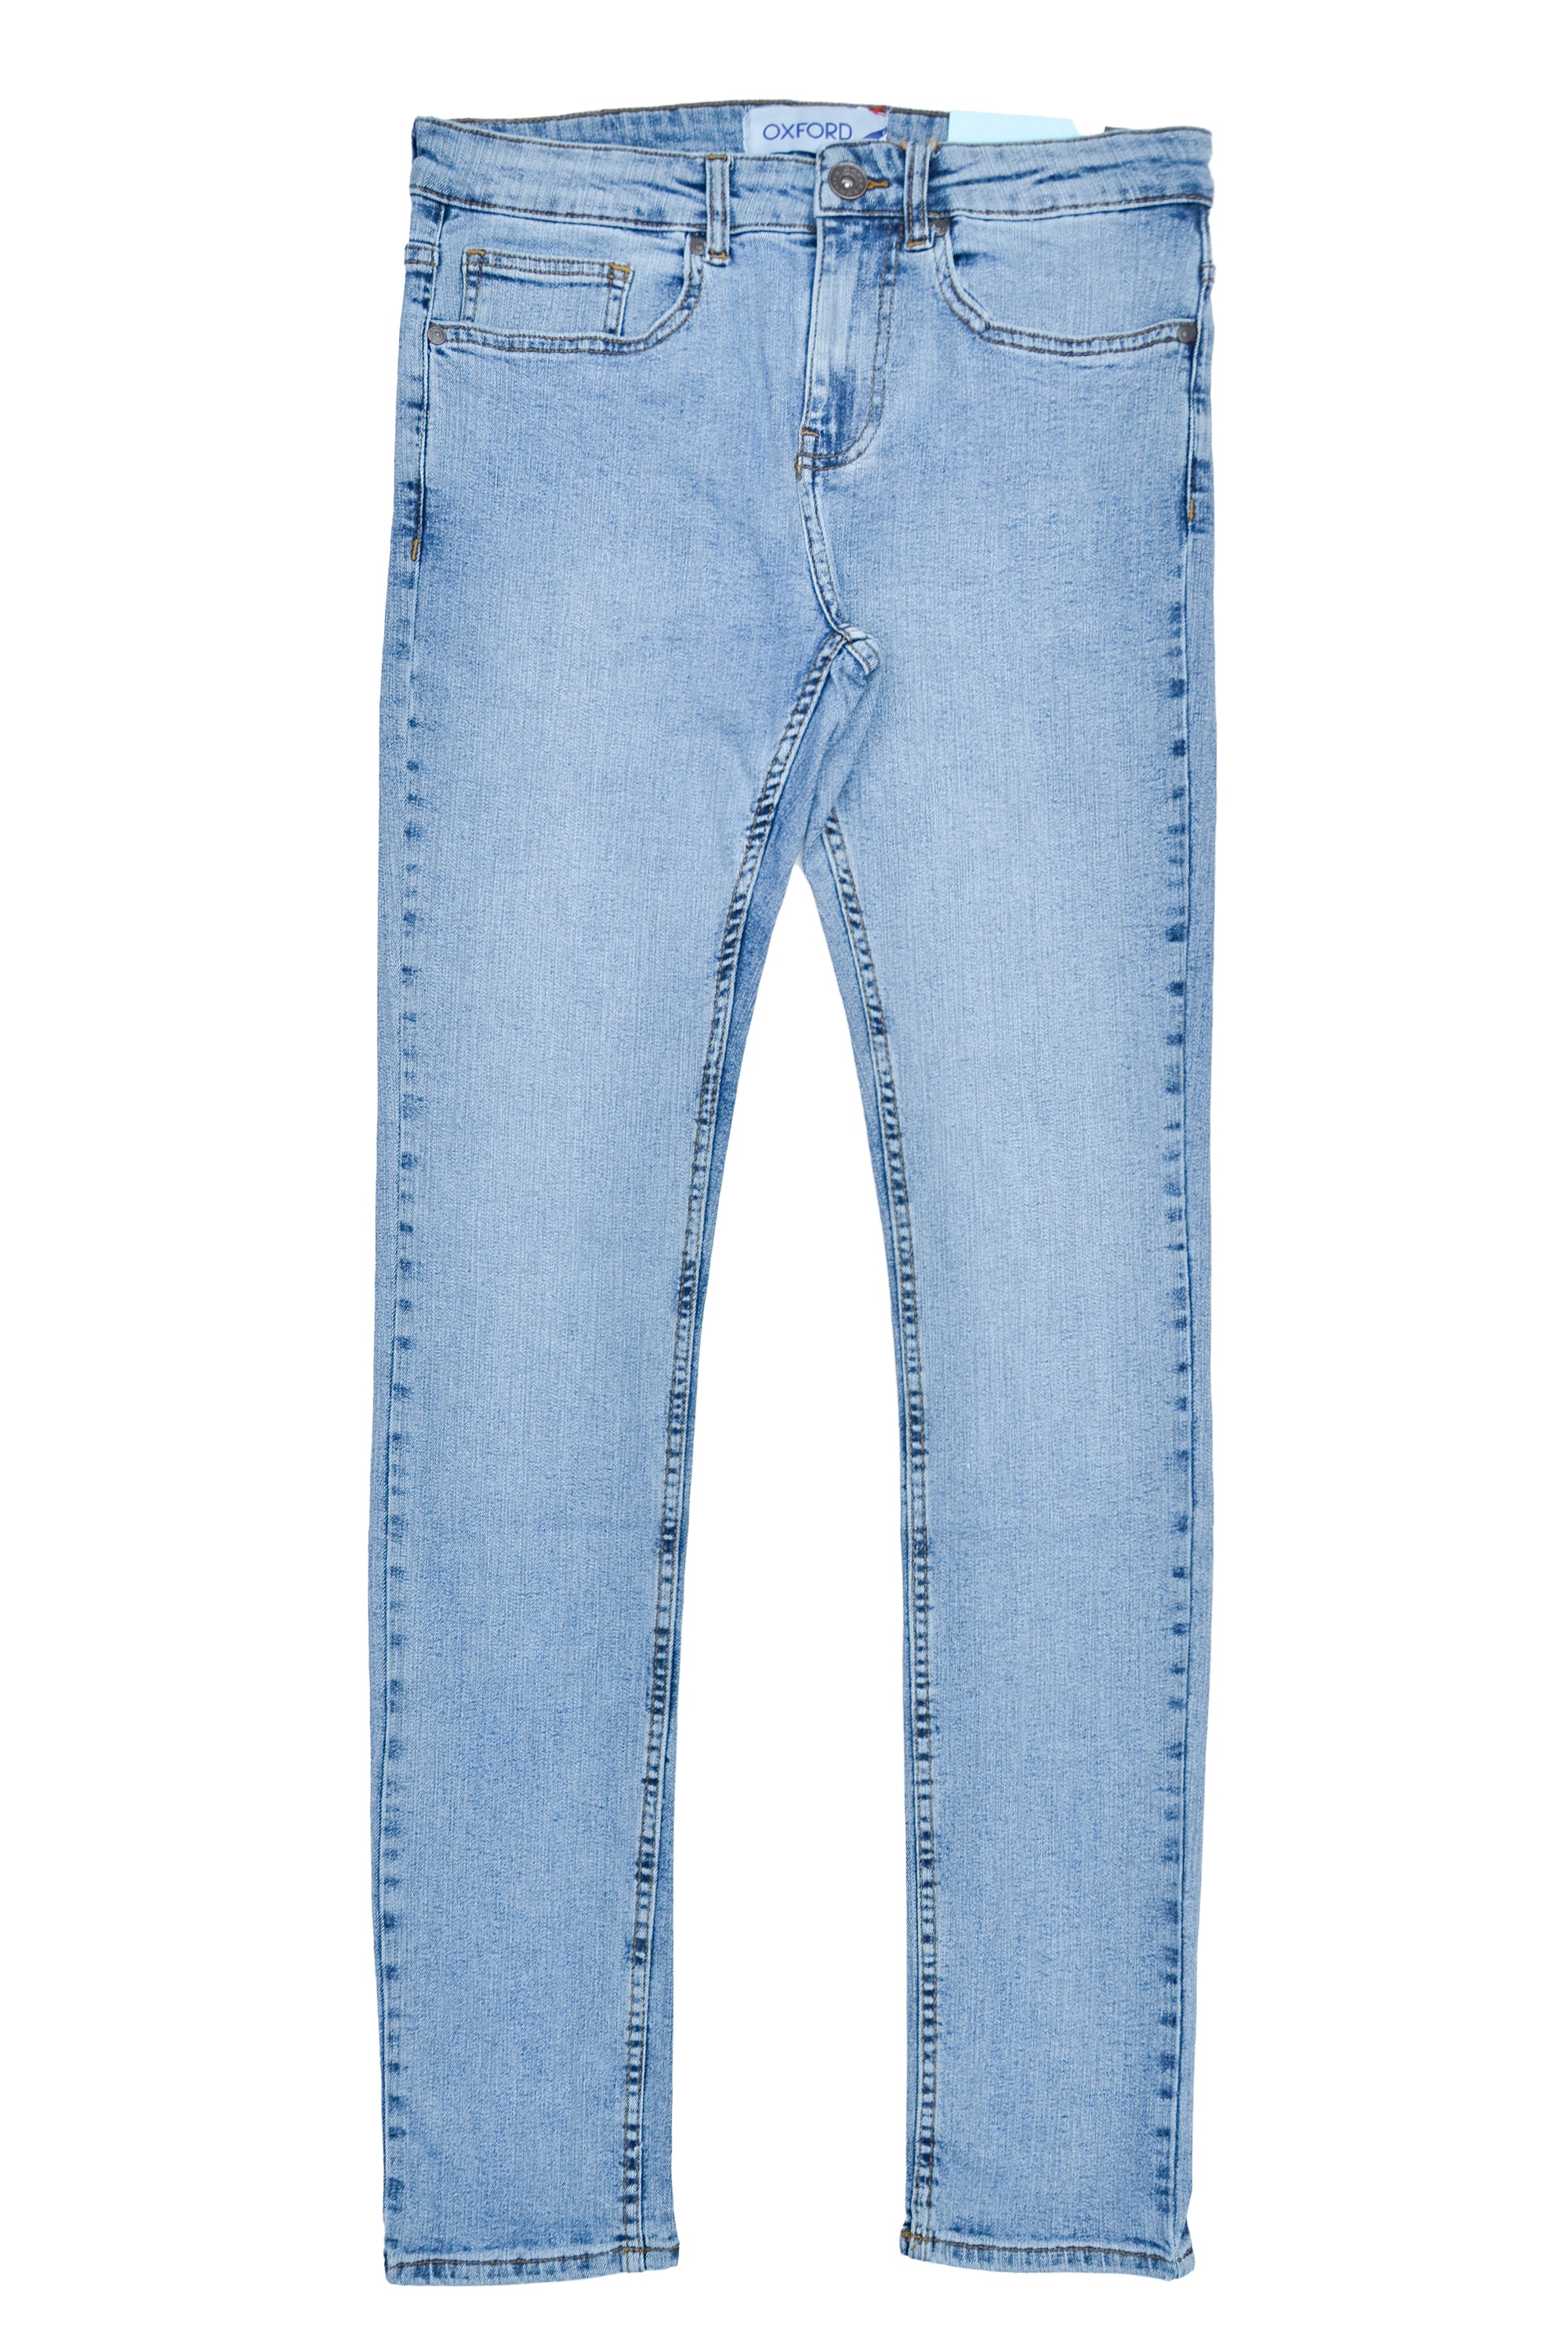 Denim Jeans – The Oxford Store